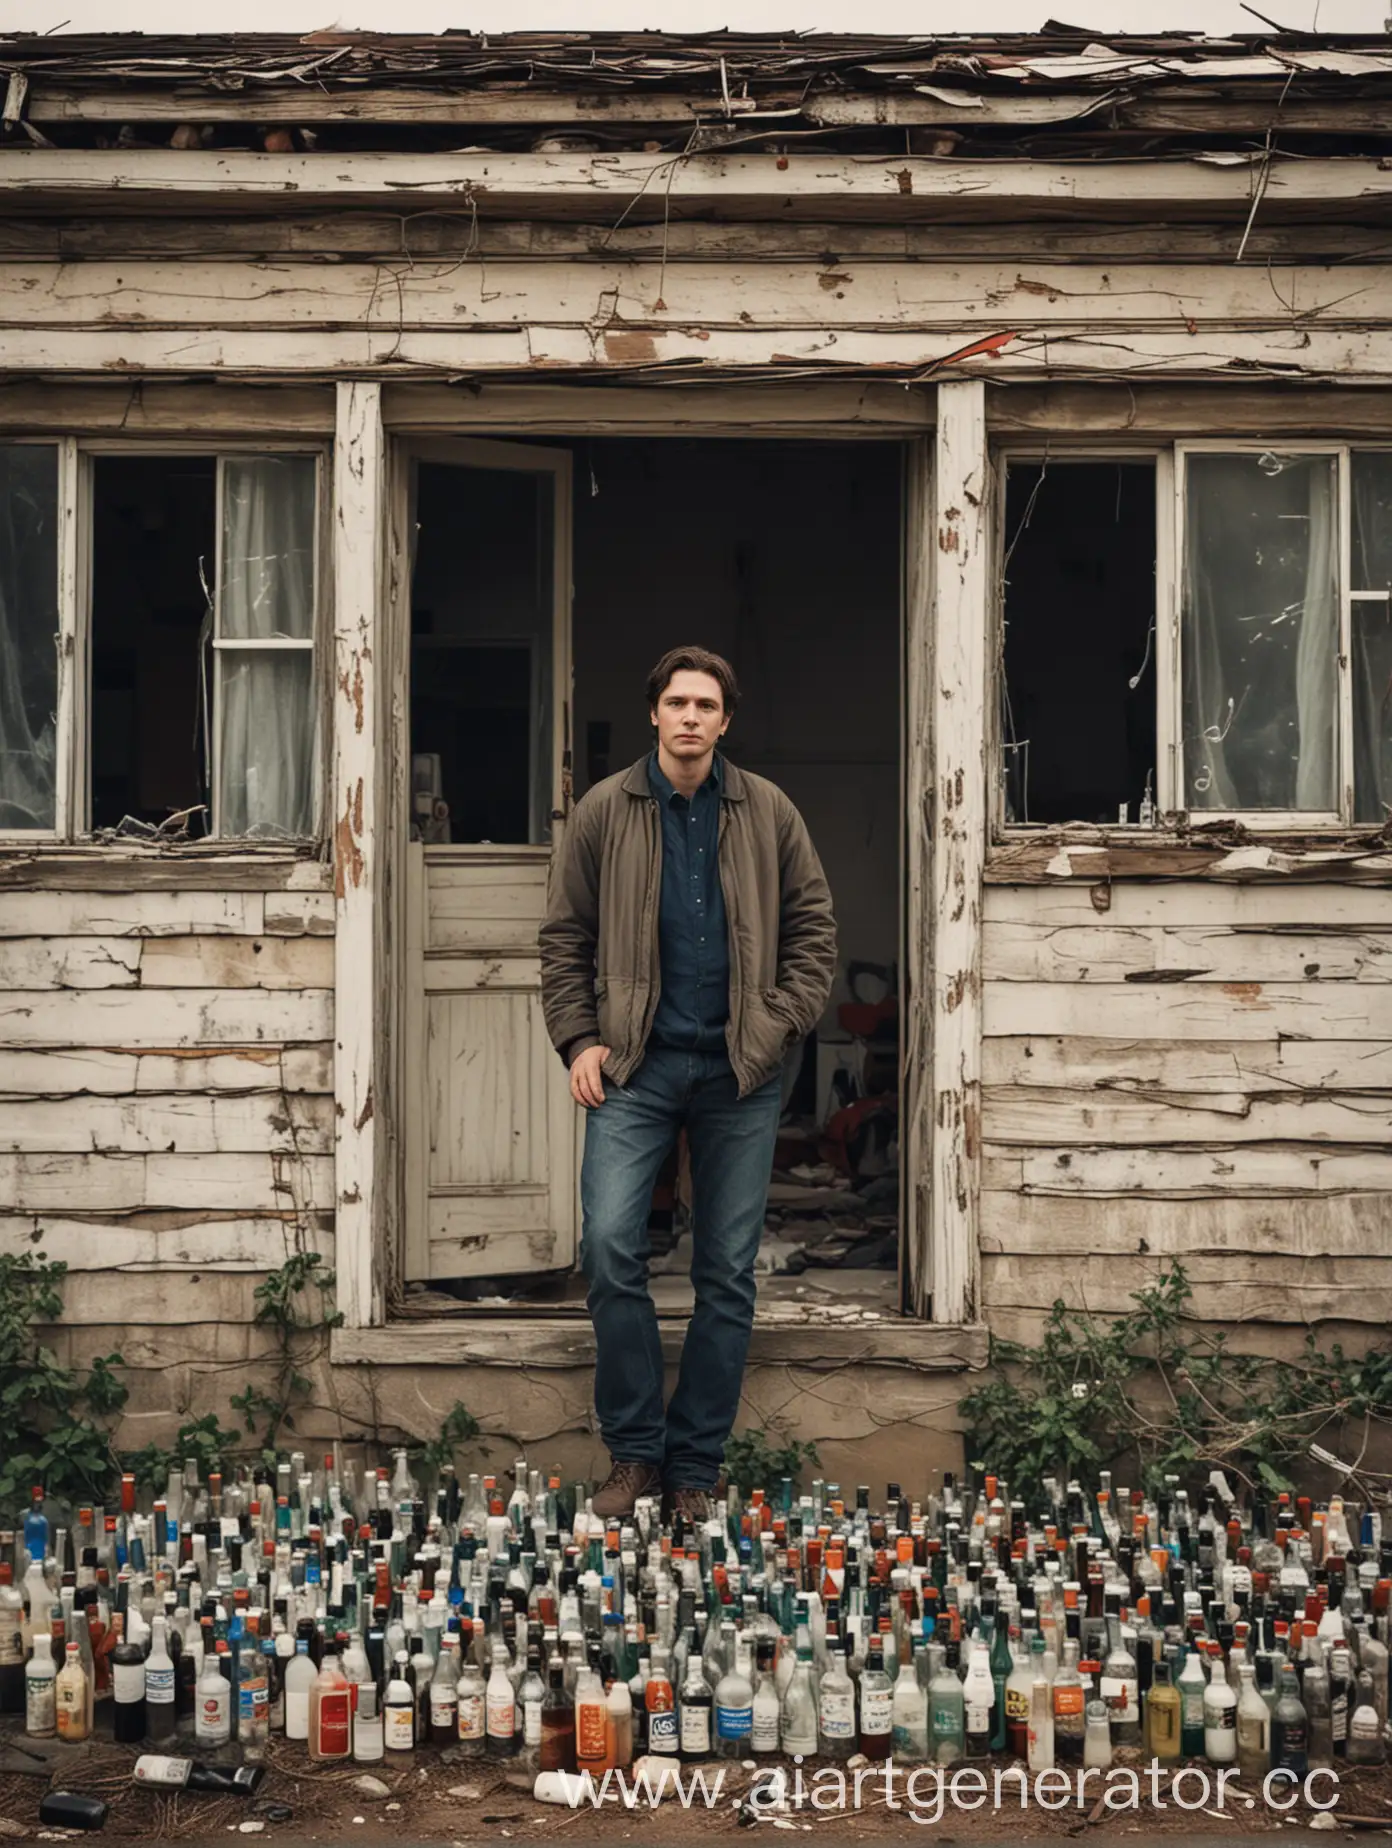 Man-Named-Lev-in-Front-of-Abandoned-House-with-Bottles-and-Syringes